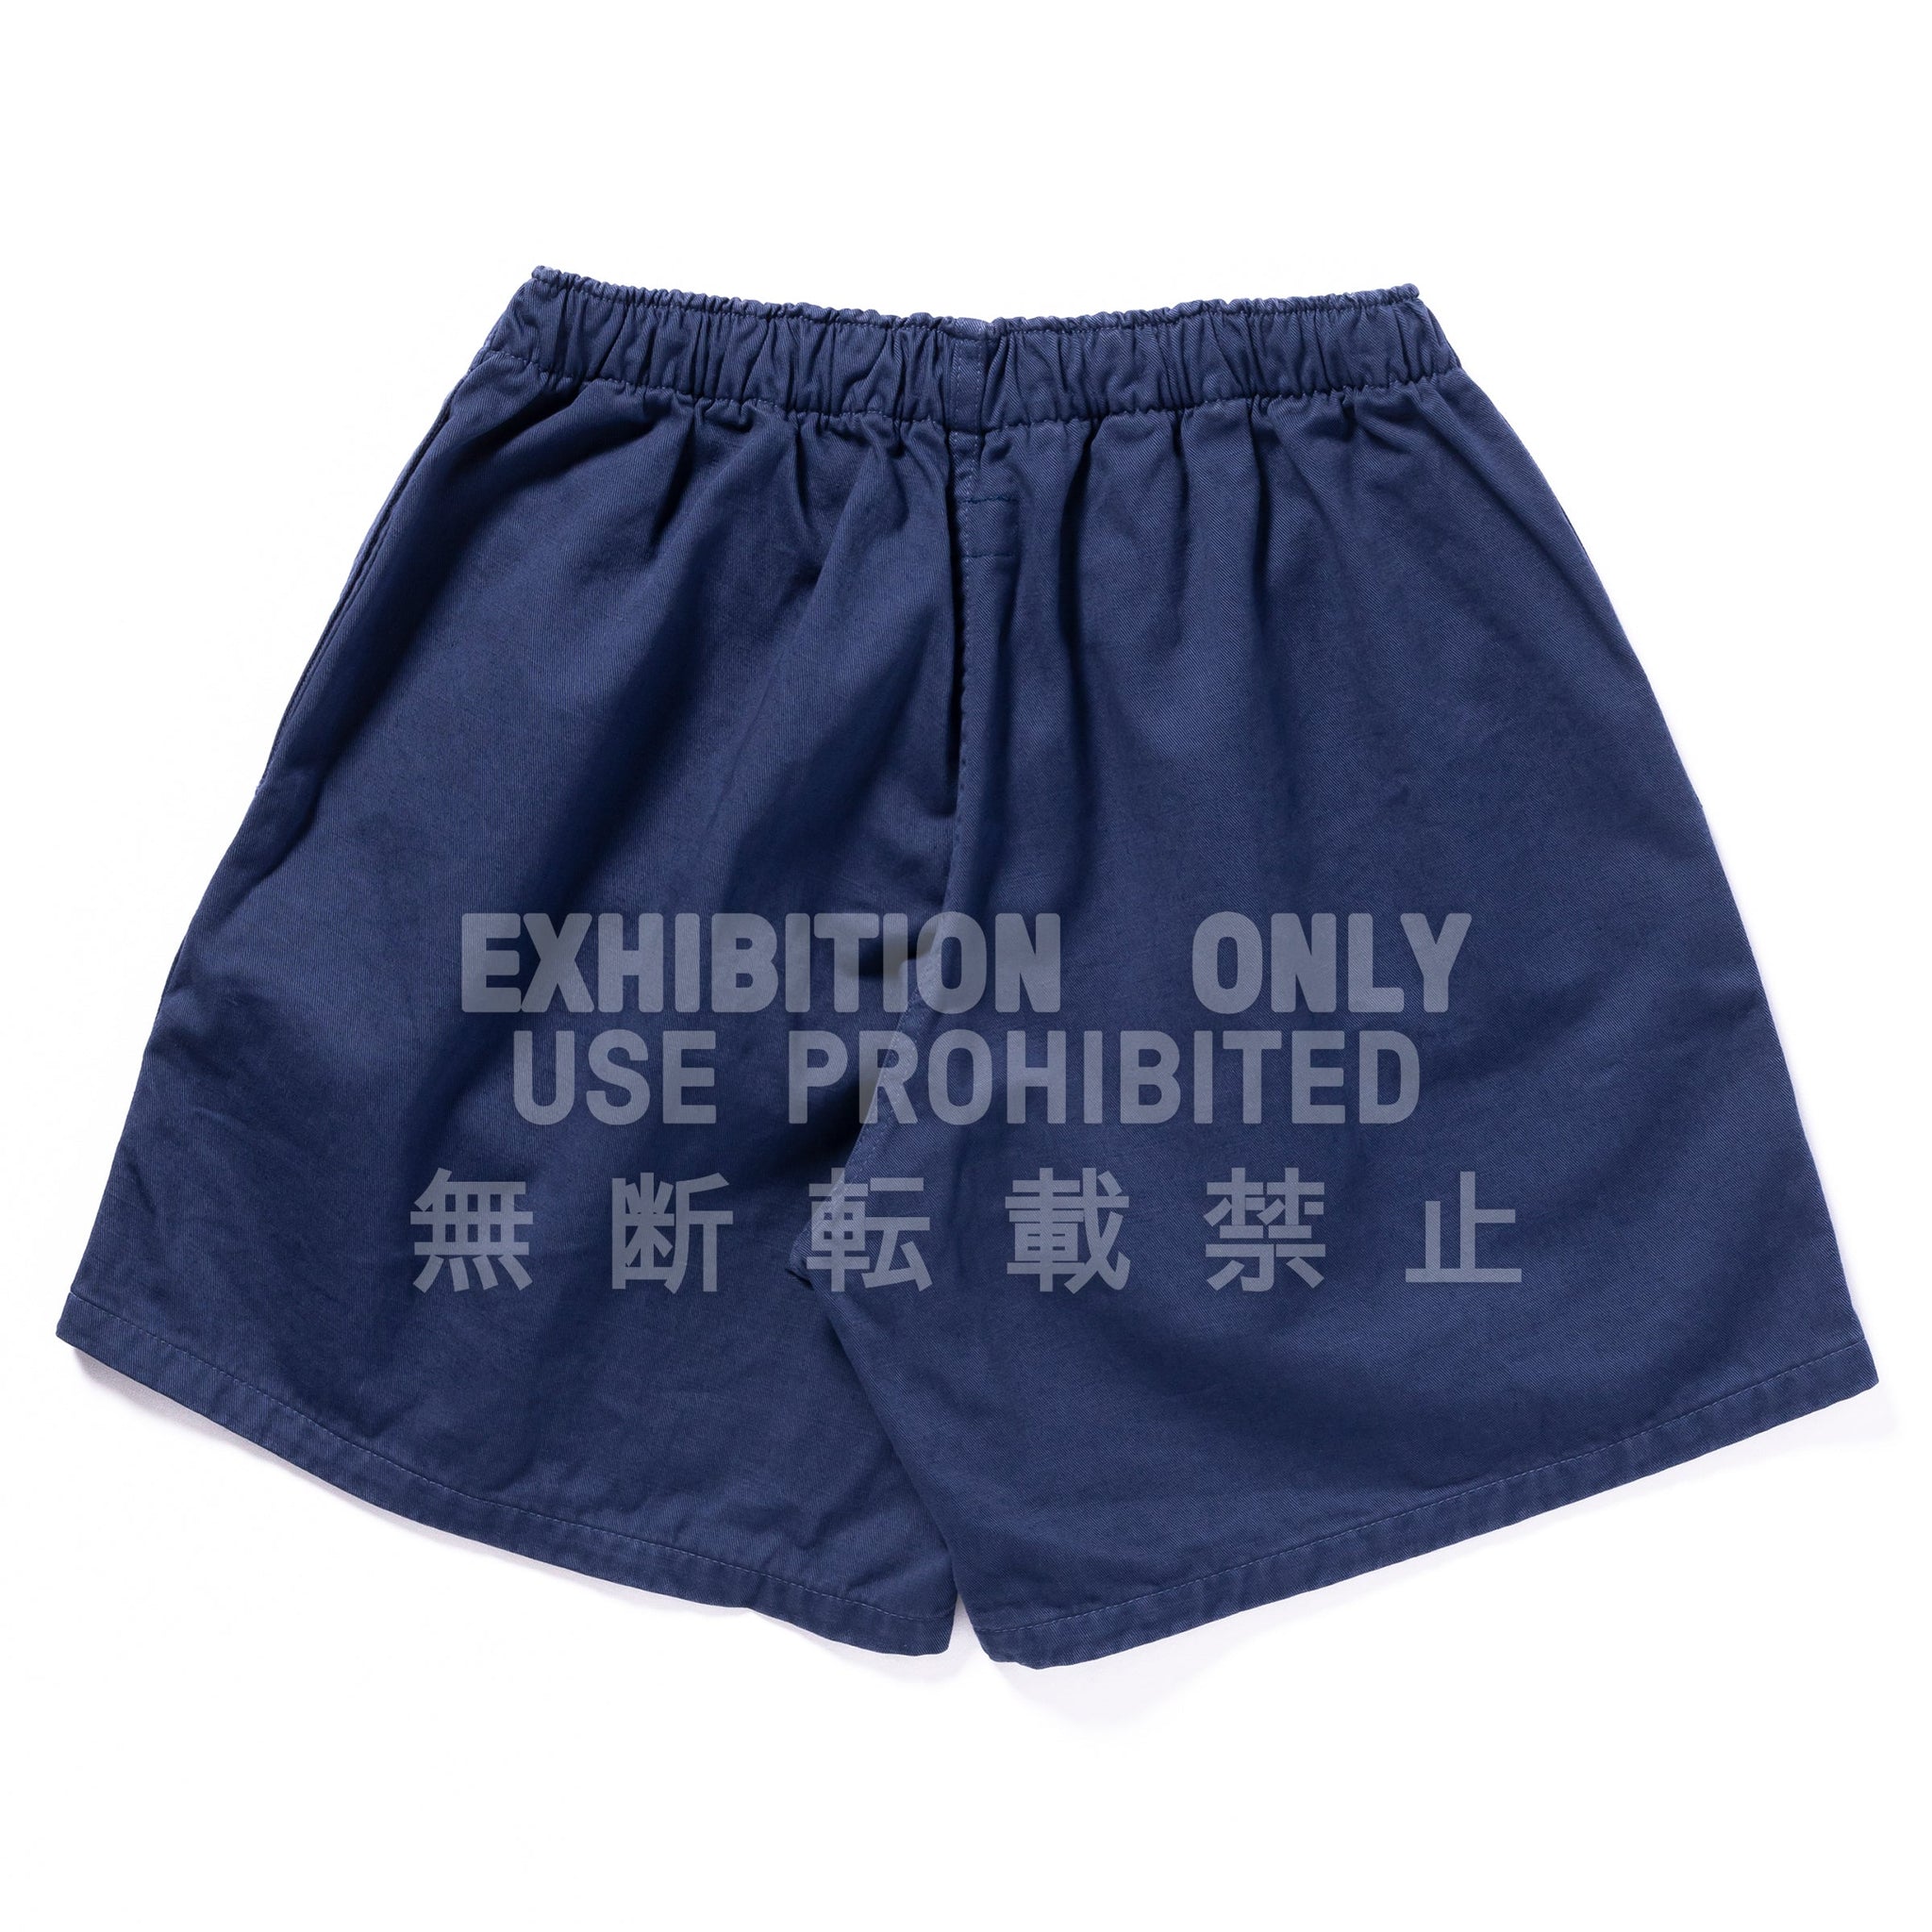 COTTON DRILL SWIM SHORTS (OVER-DYED)